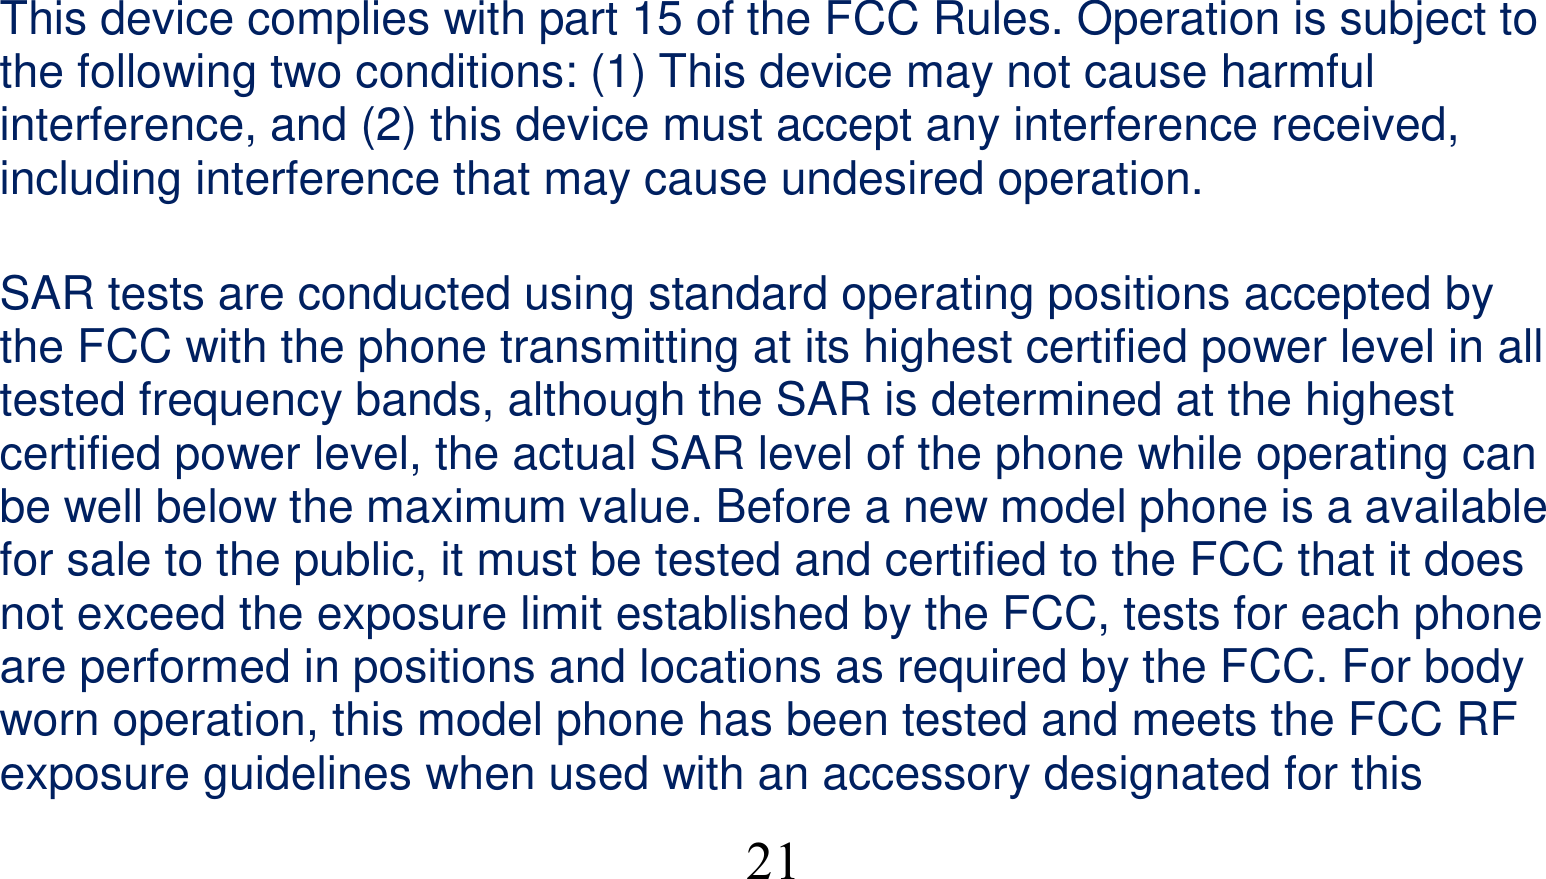  21This device complies with part 15 of the FCC Rules. Operation is subject to the following two conditions: (1) This device may not cause harmful interference, and (2) this device must accept any interference received, including interference that may cause undesired operation.      SAR tests are conducted using standard operating positions accepted by the FCC with the phone transmitting at its highest certified power level in all tested frequency bands, although the SAR is determined at the highest certified power level, the actual SAR level of the phone while operating can be well below the maximum value. Before a new model phone is a available for sale to the public, it must be tested and certified to the FCC that it does not exceed the exposure limit established by the FCC, tests for each phone are performed in positions and locations as required by the FCC. For body worn operation, this model phone has been tested and meets the FCC RF exposure guidelines when used with an accessory designated for this 